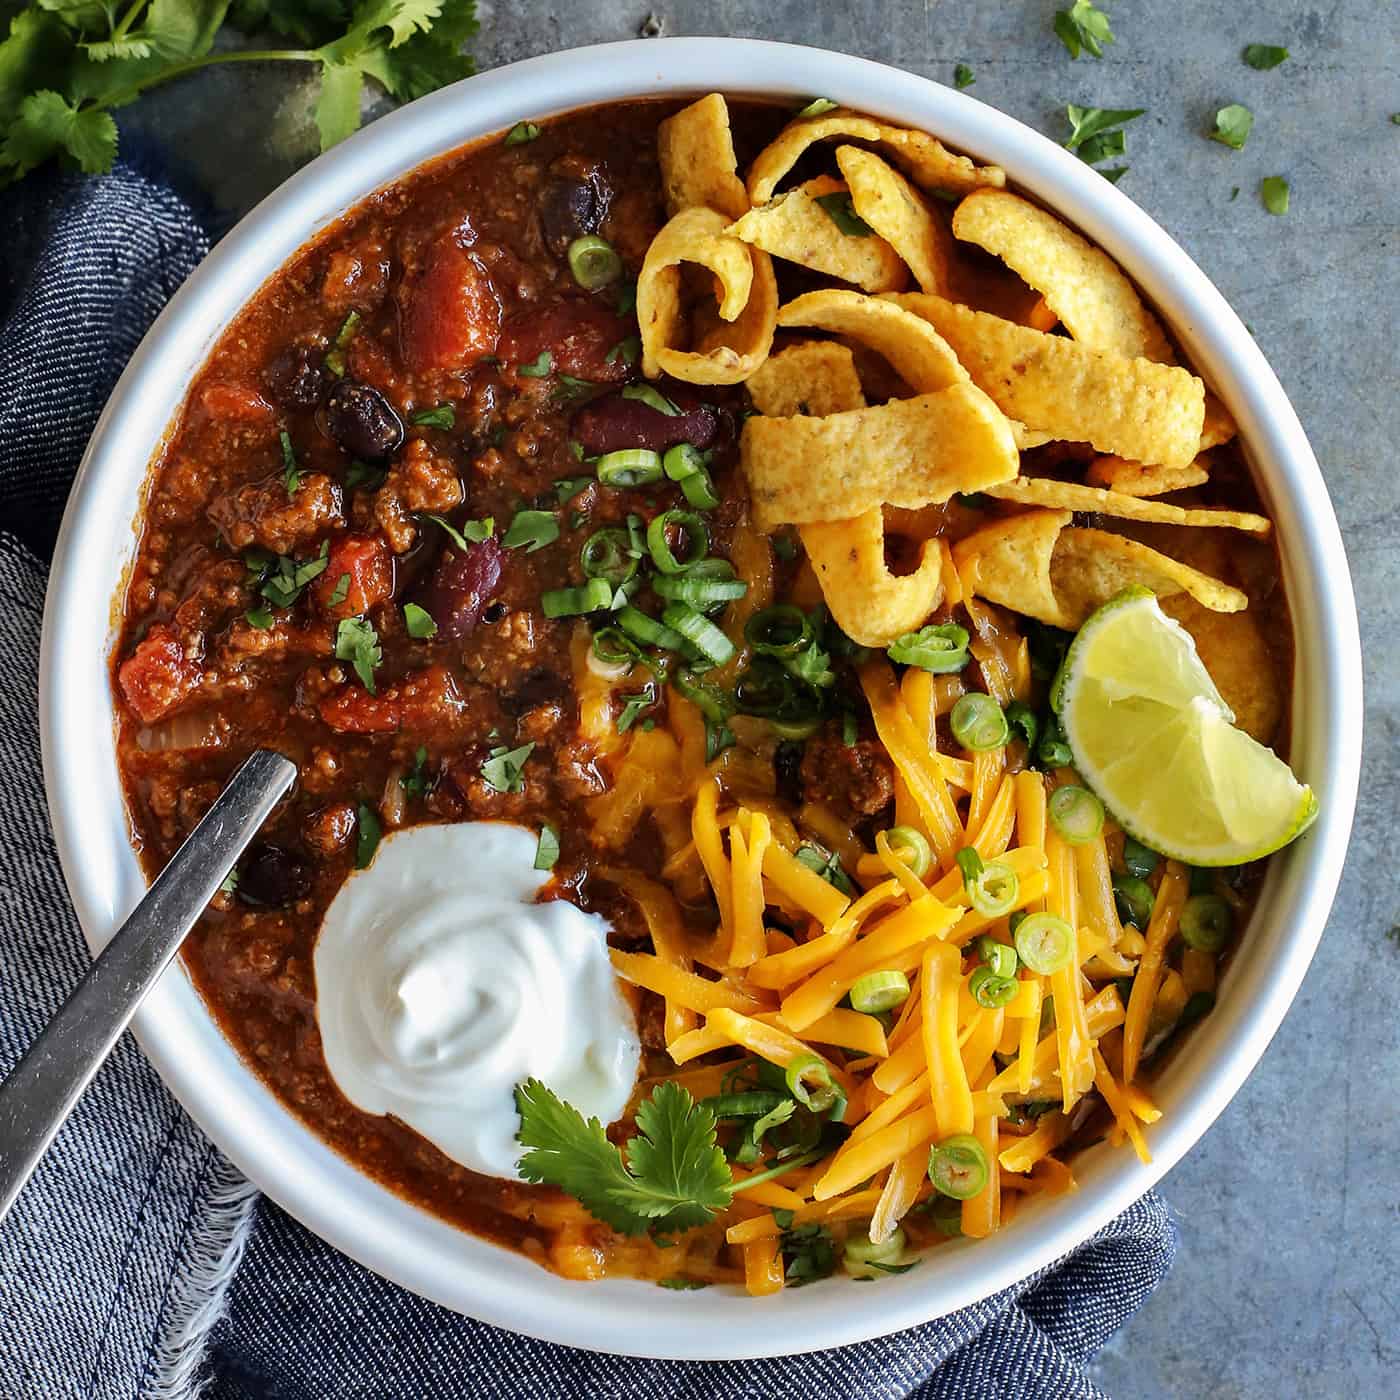 Overhead view of a bowl of slow cooker beef chili